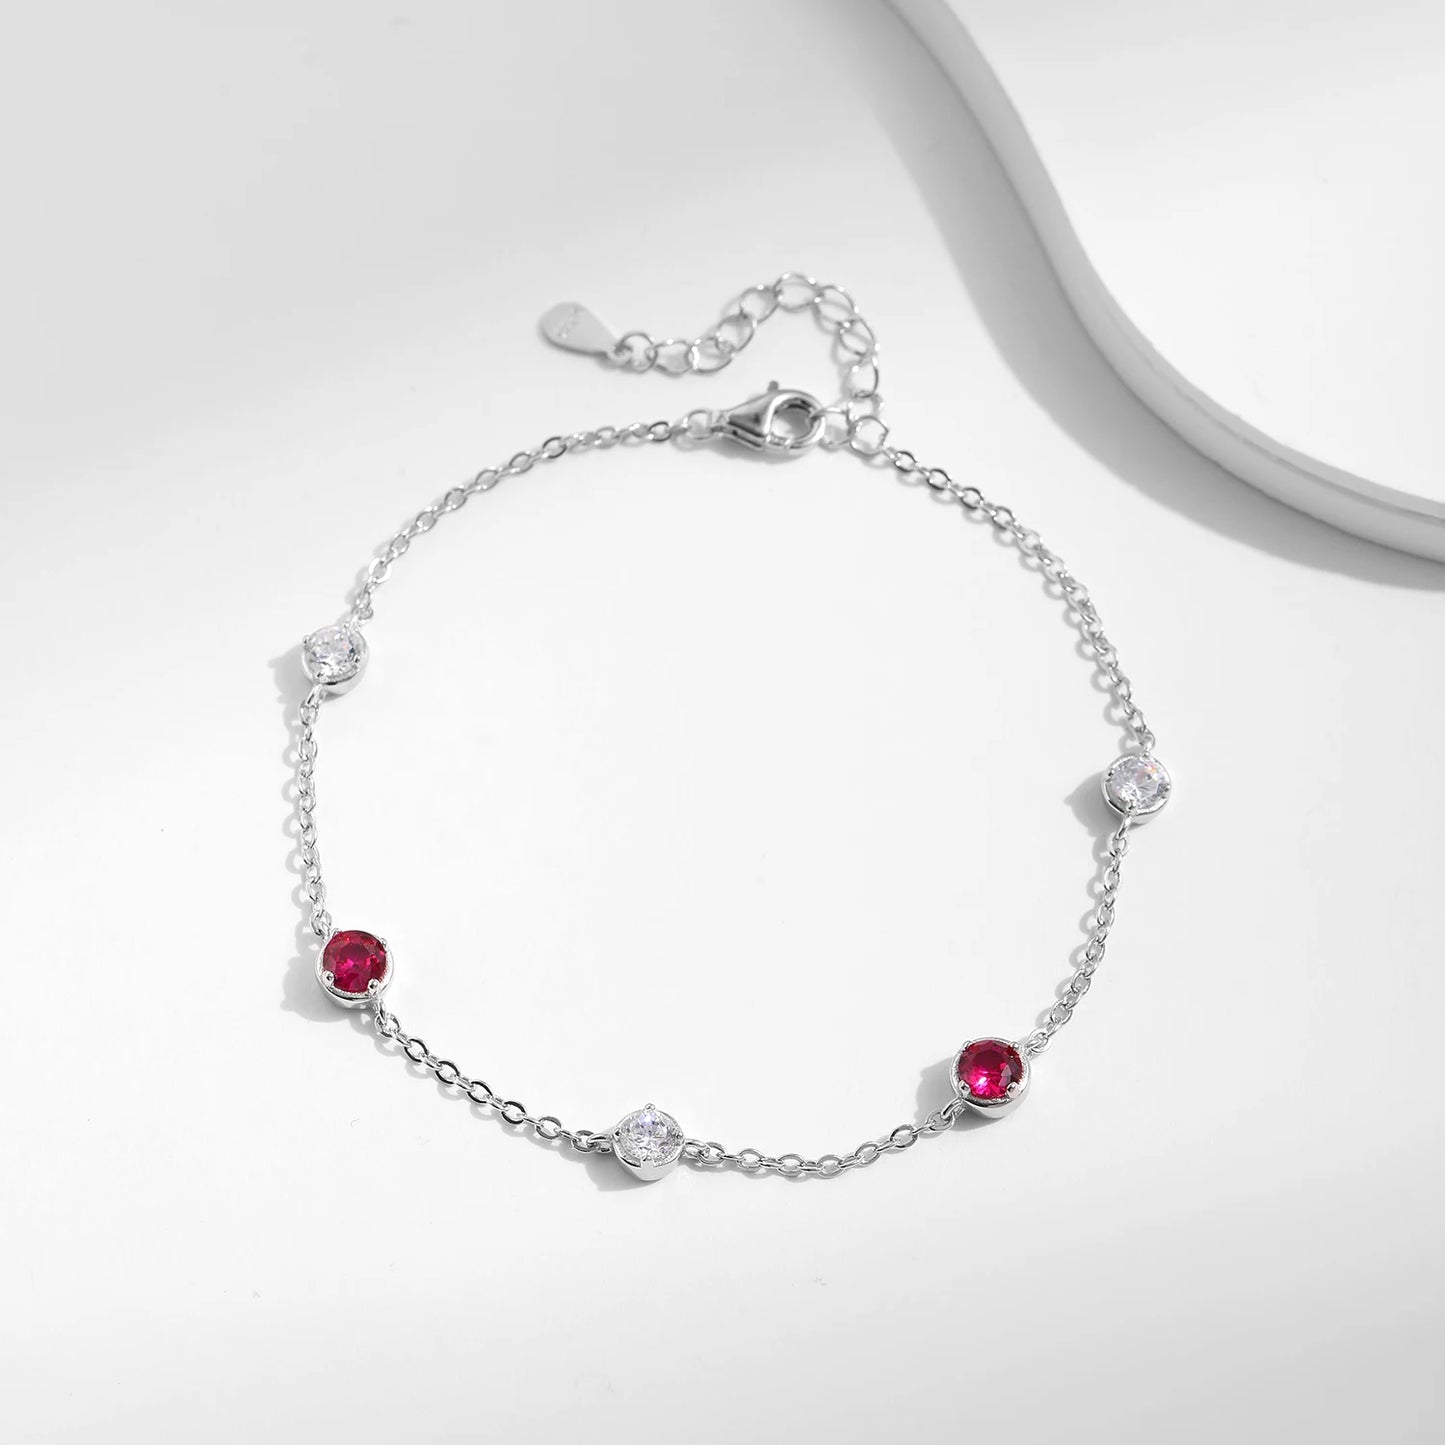 Adjustable S925 Silver Bracelet with Red Stones for Women - MQ